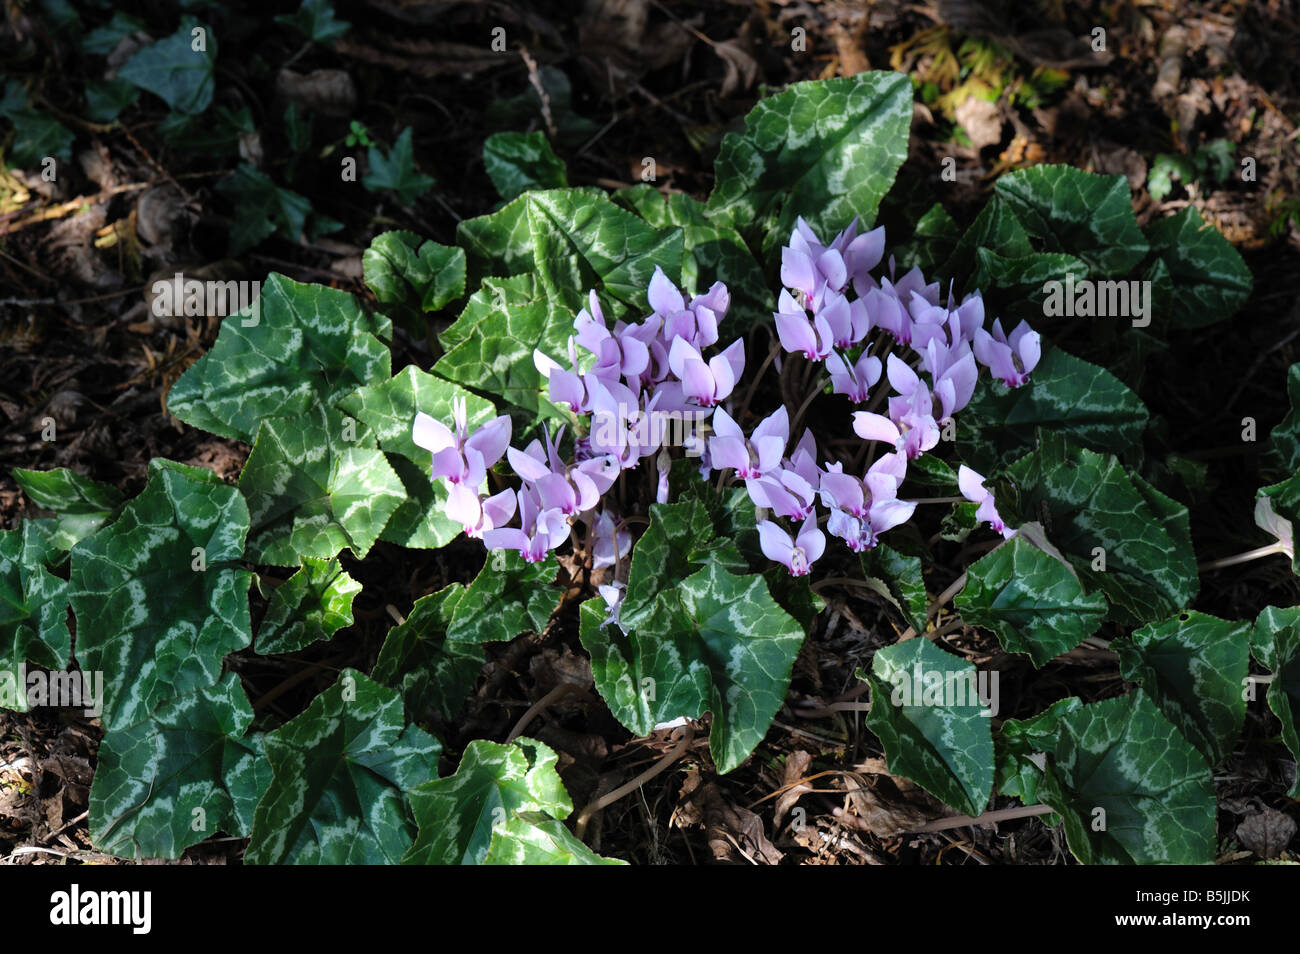 Ivy leaved cyclamen or sowbread Cyclamen hederifolium flowering in heavy shade Stock Photo